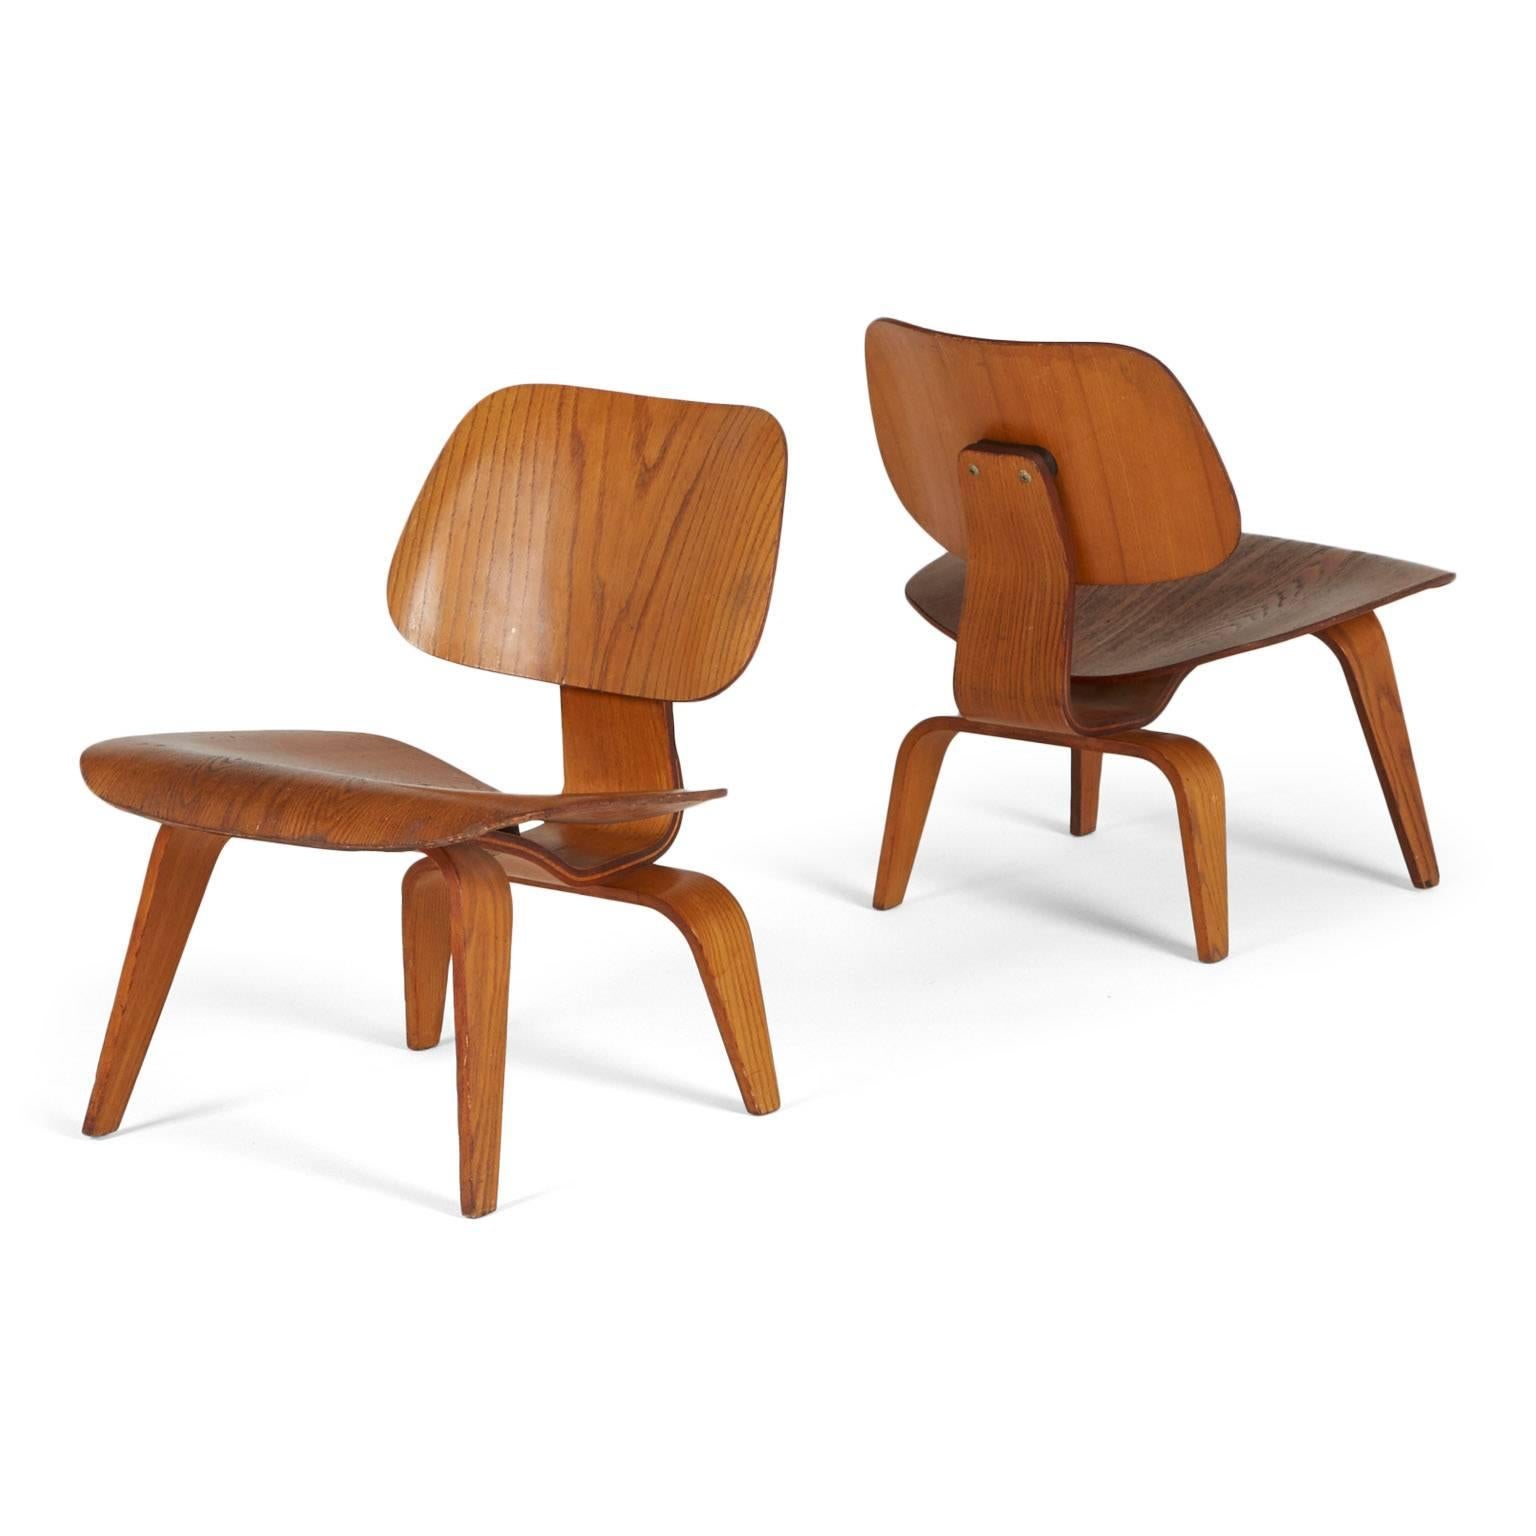 Mid-Century Modern Charles and Ray Eames LCW Lounge Chairs, Early Production, circa 1950, Rare Pair